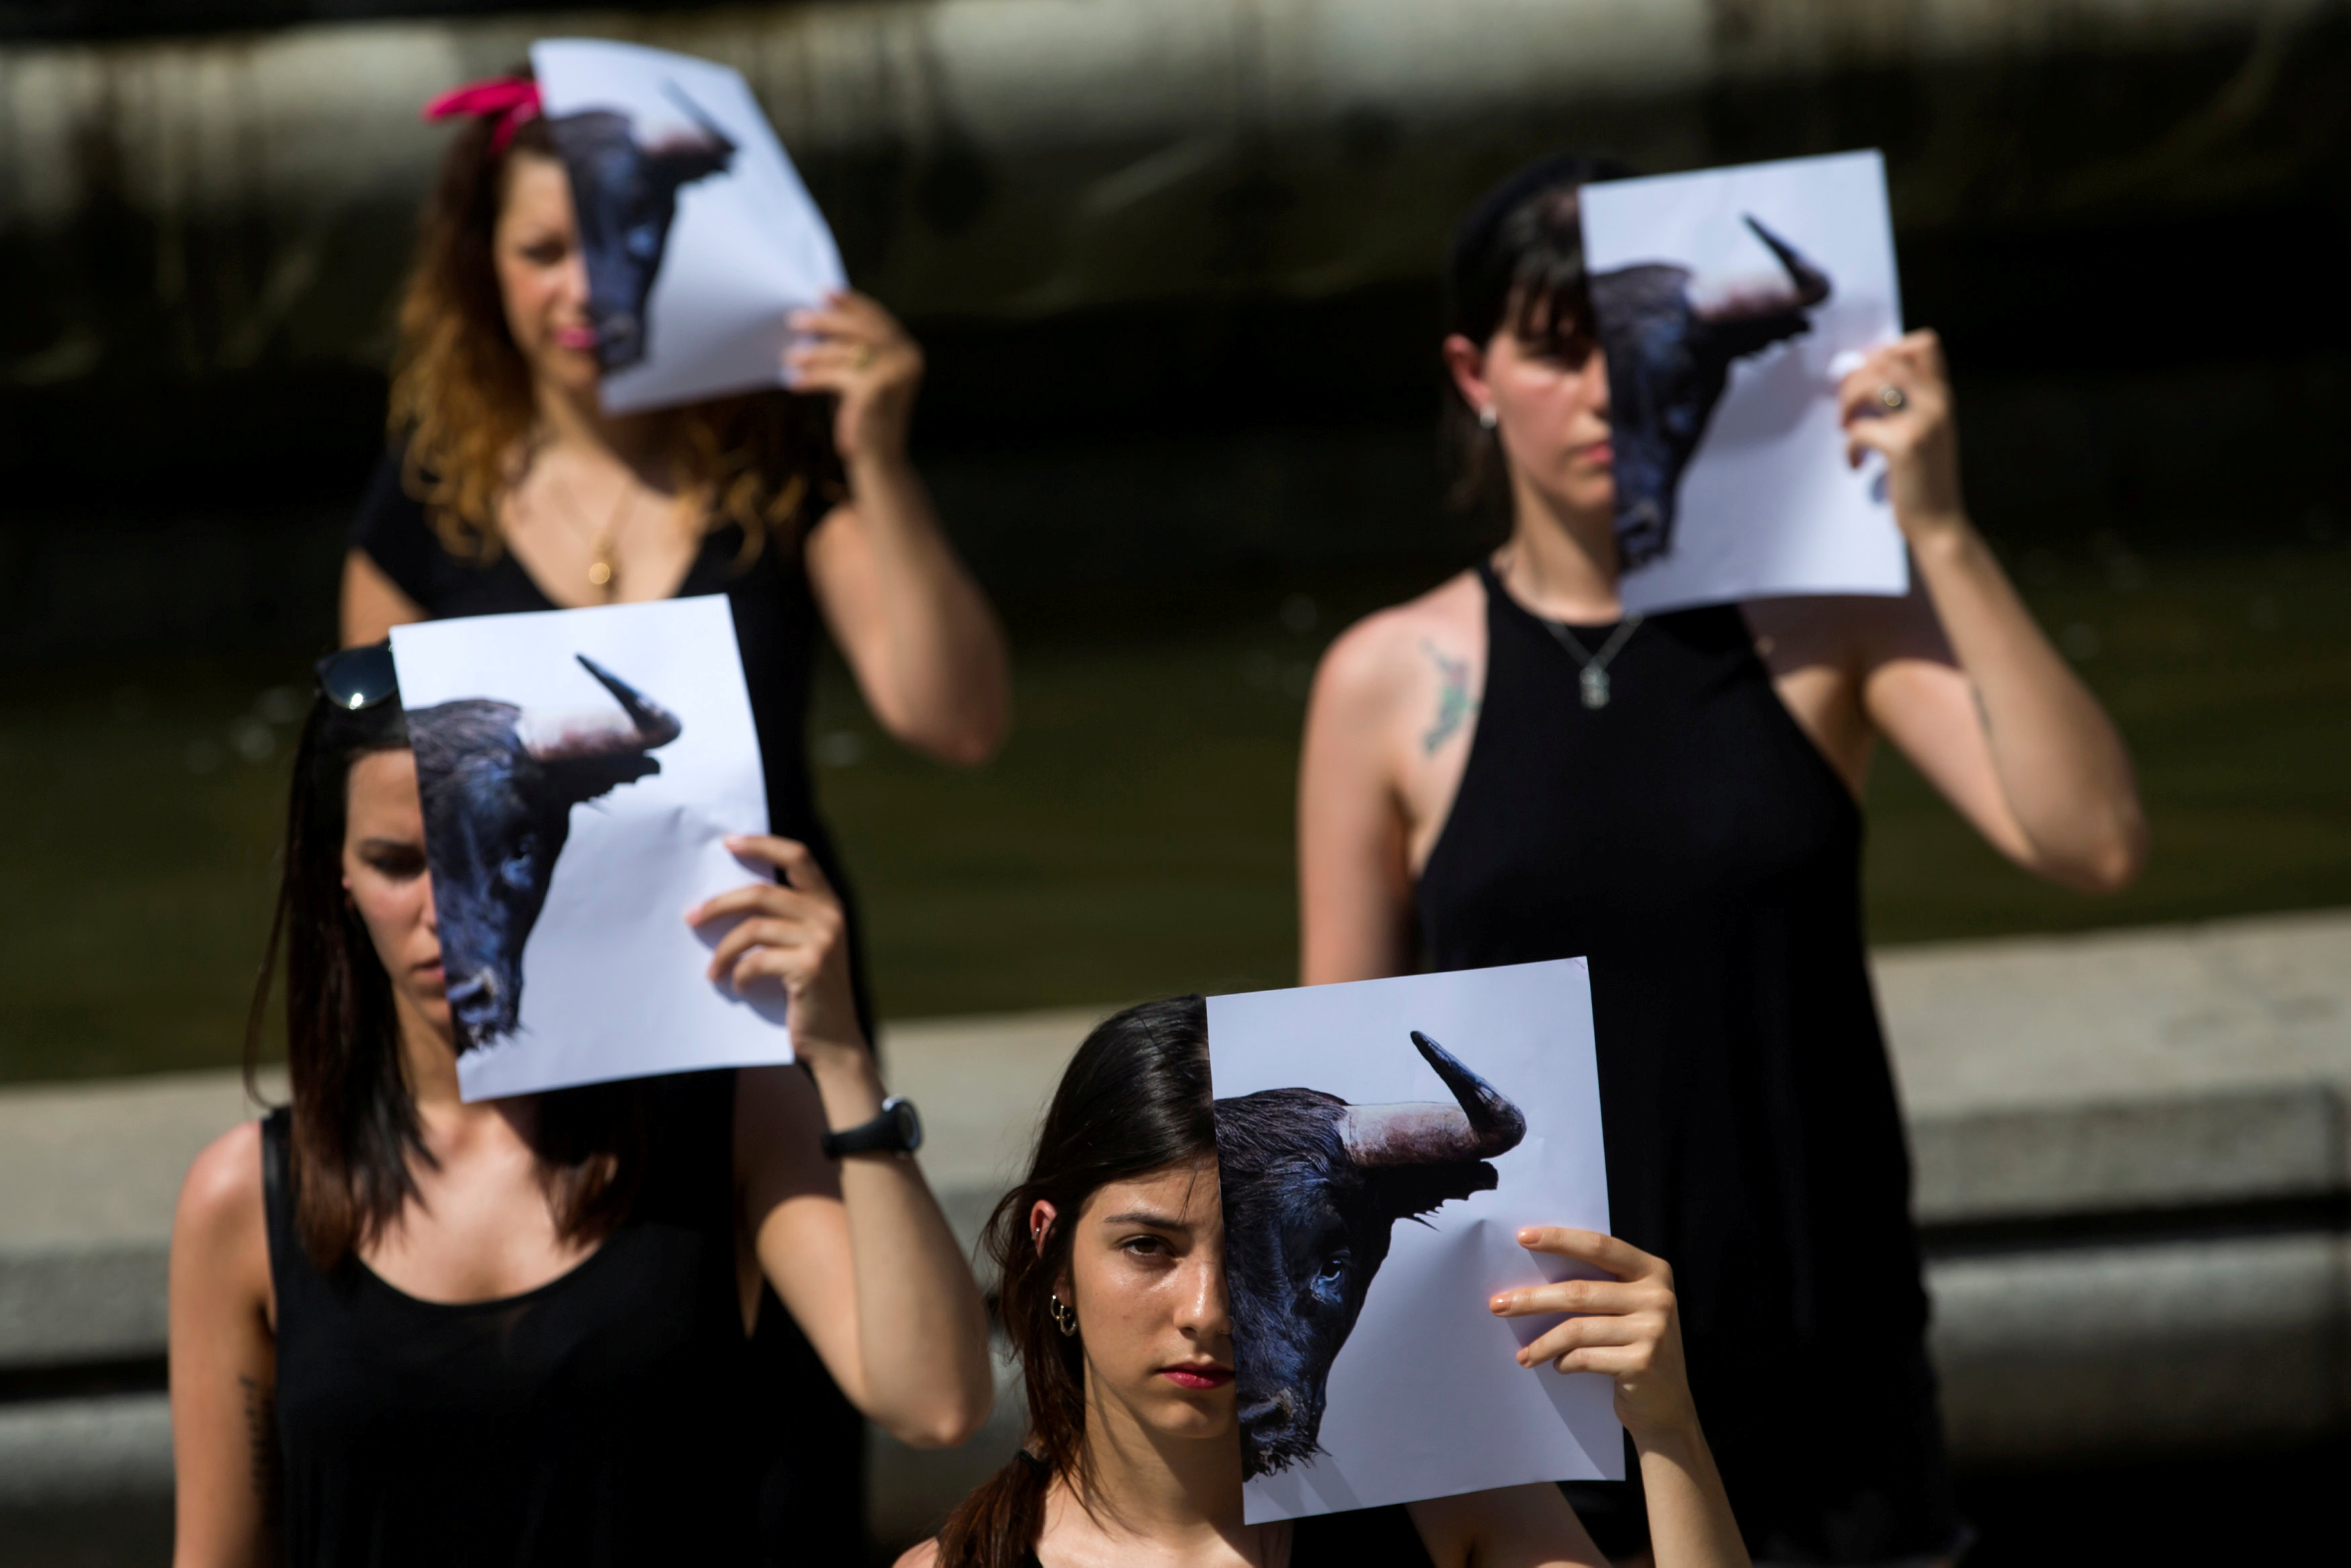 MADRID 2017-06-22 Animal rights activists take part in a protest against bullfighting in Madrid, Spain June 21, 2017. REUTERS/Juan Medina TPX IMAGES OF THE DAY Photo: / REUTERS / TT / kod 72000